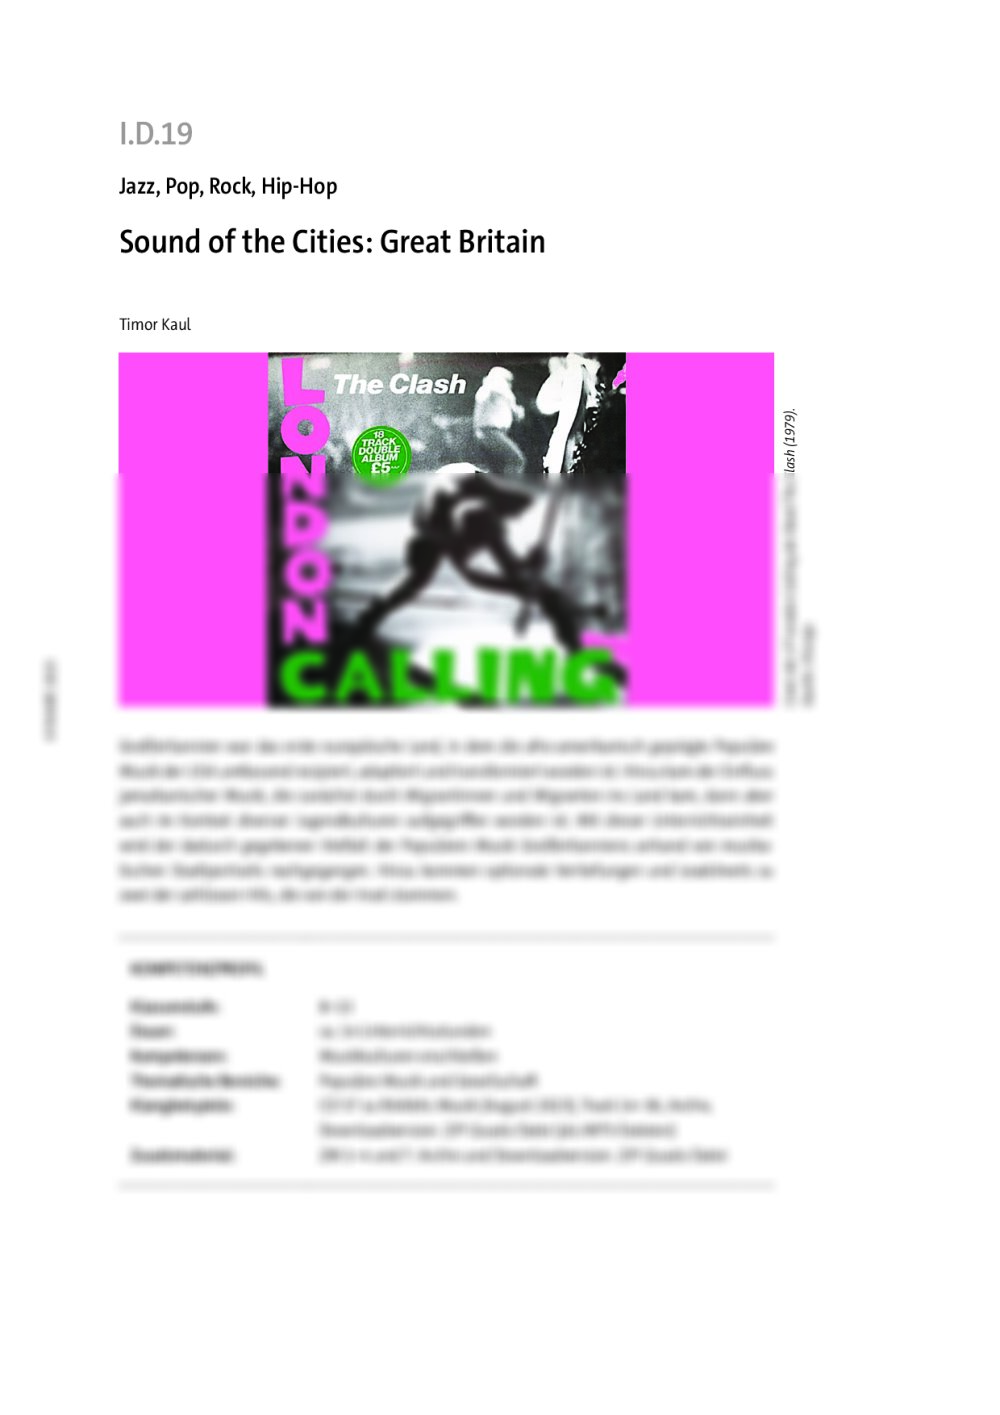 Sound of the Cities: Great Britain - Seite 1